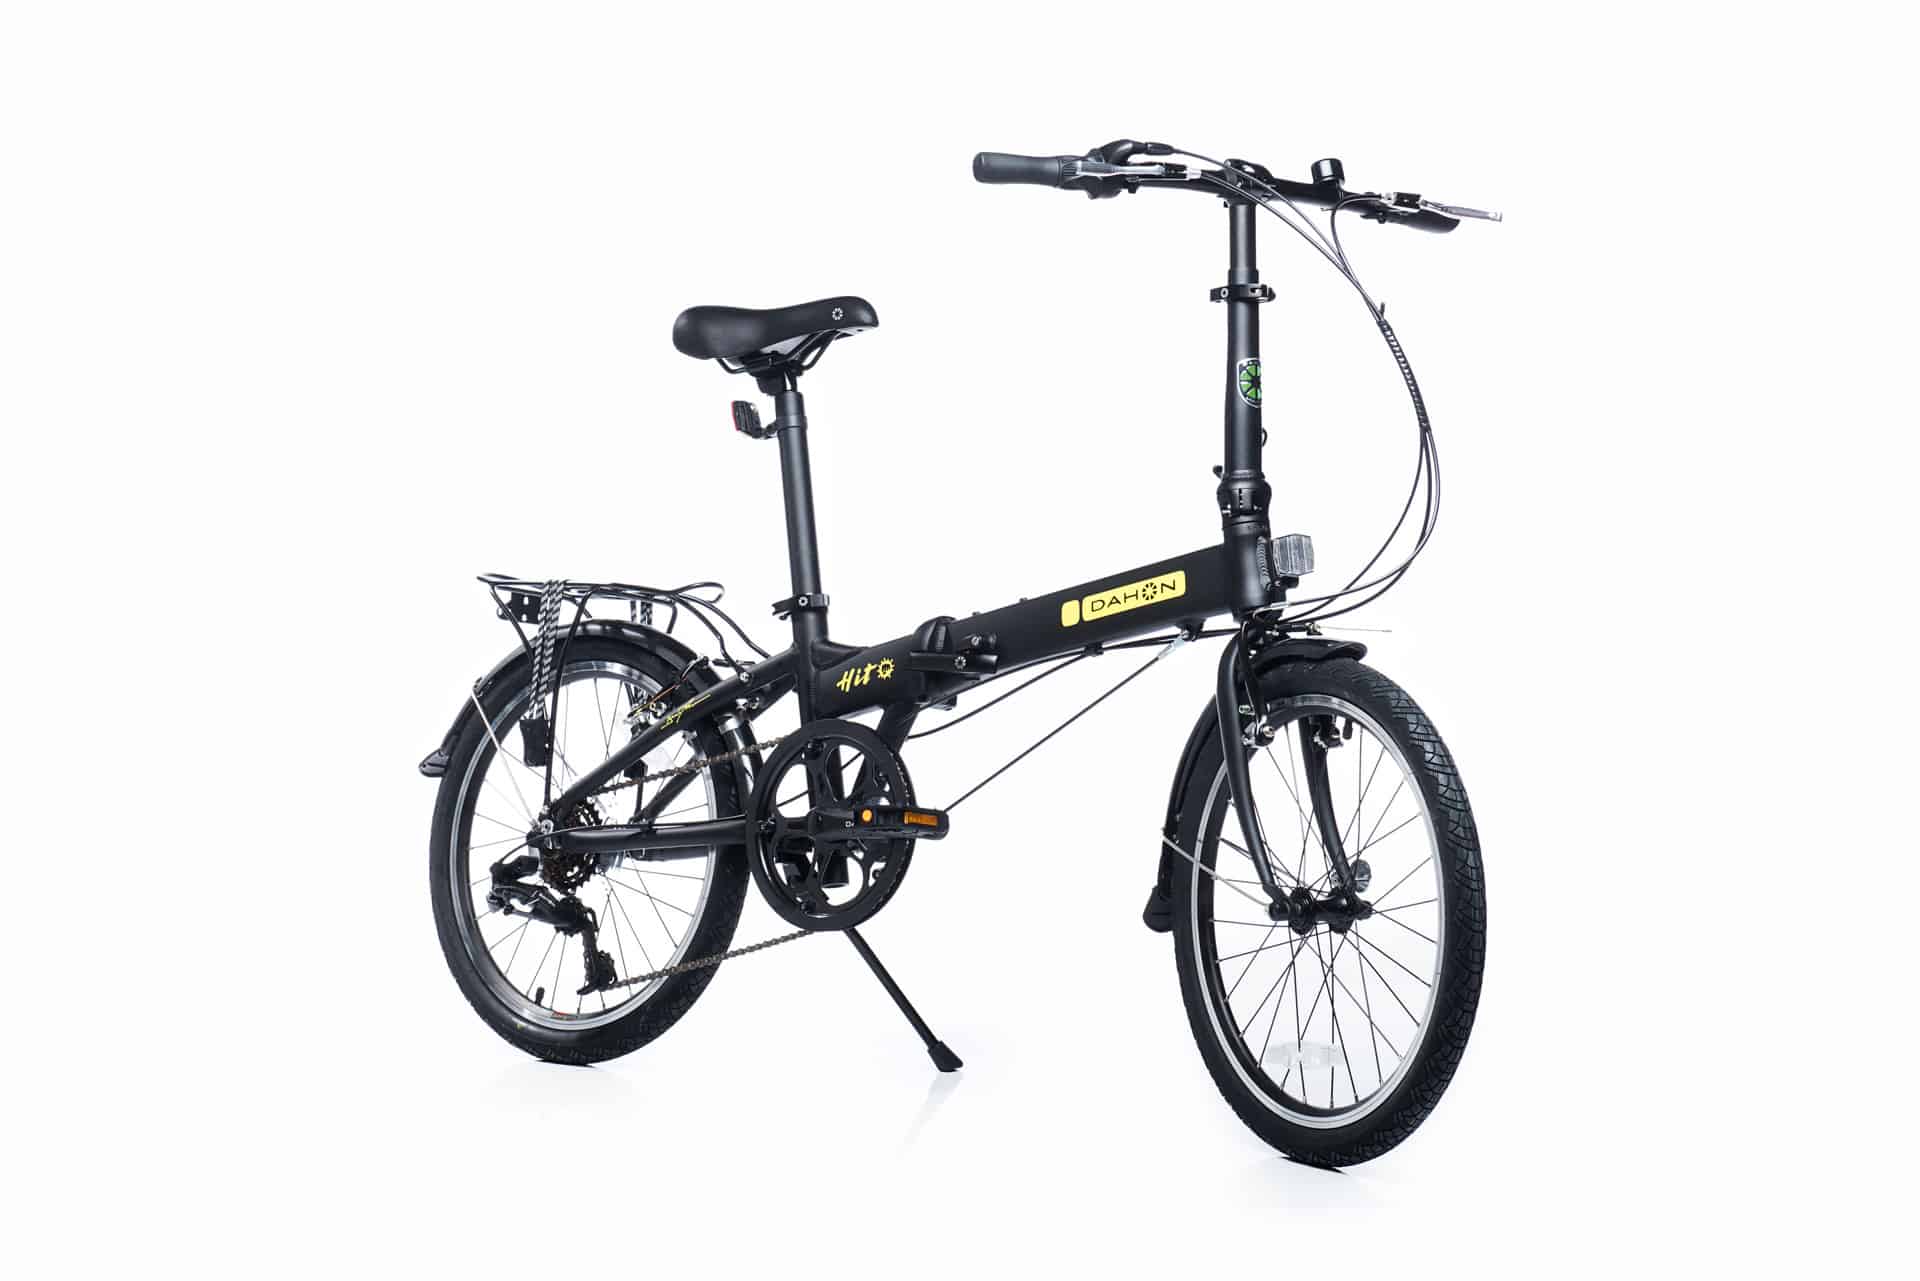 dahon folding bike manufactured and sold globally Blue Dolphin web design